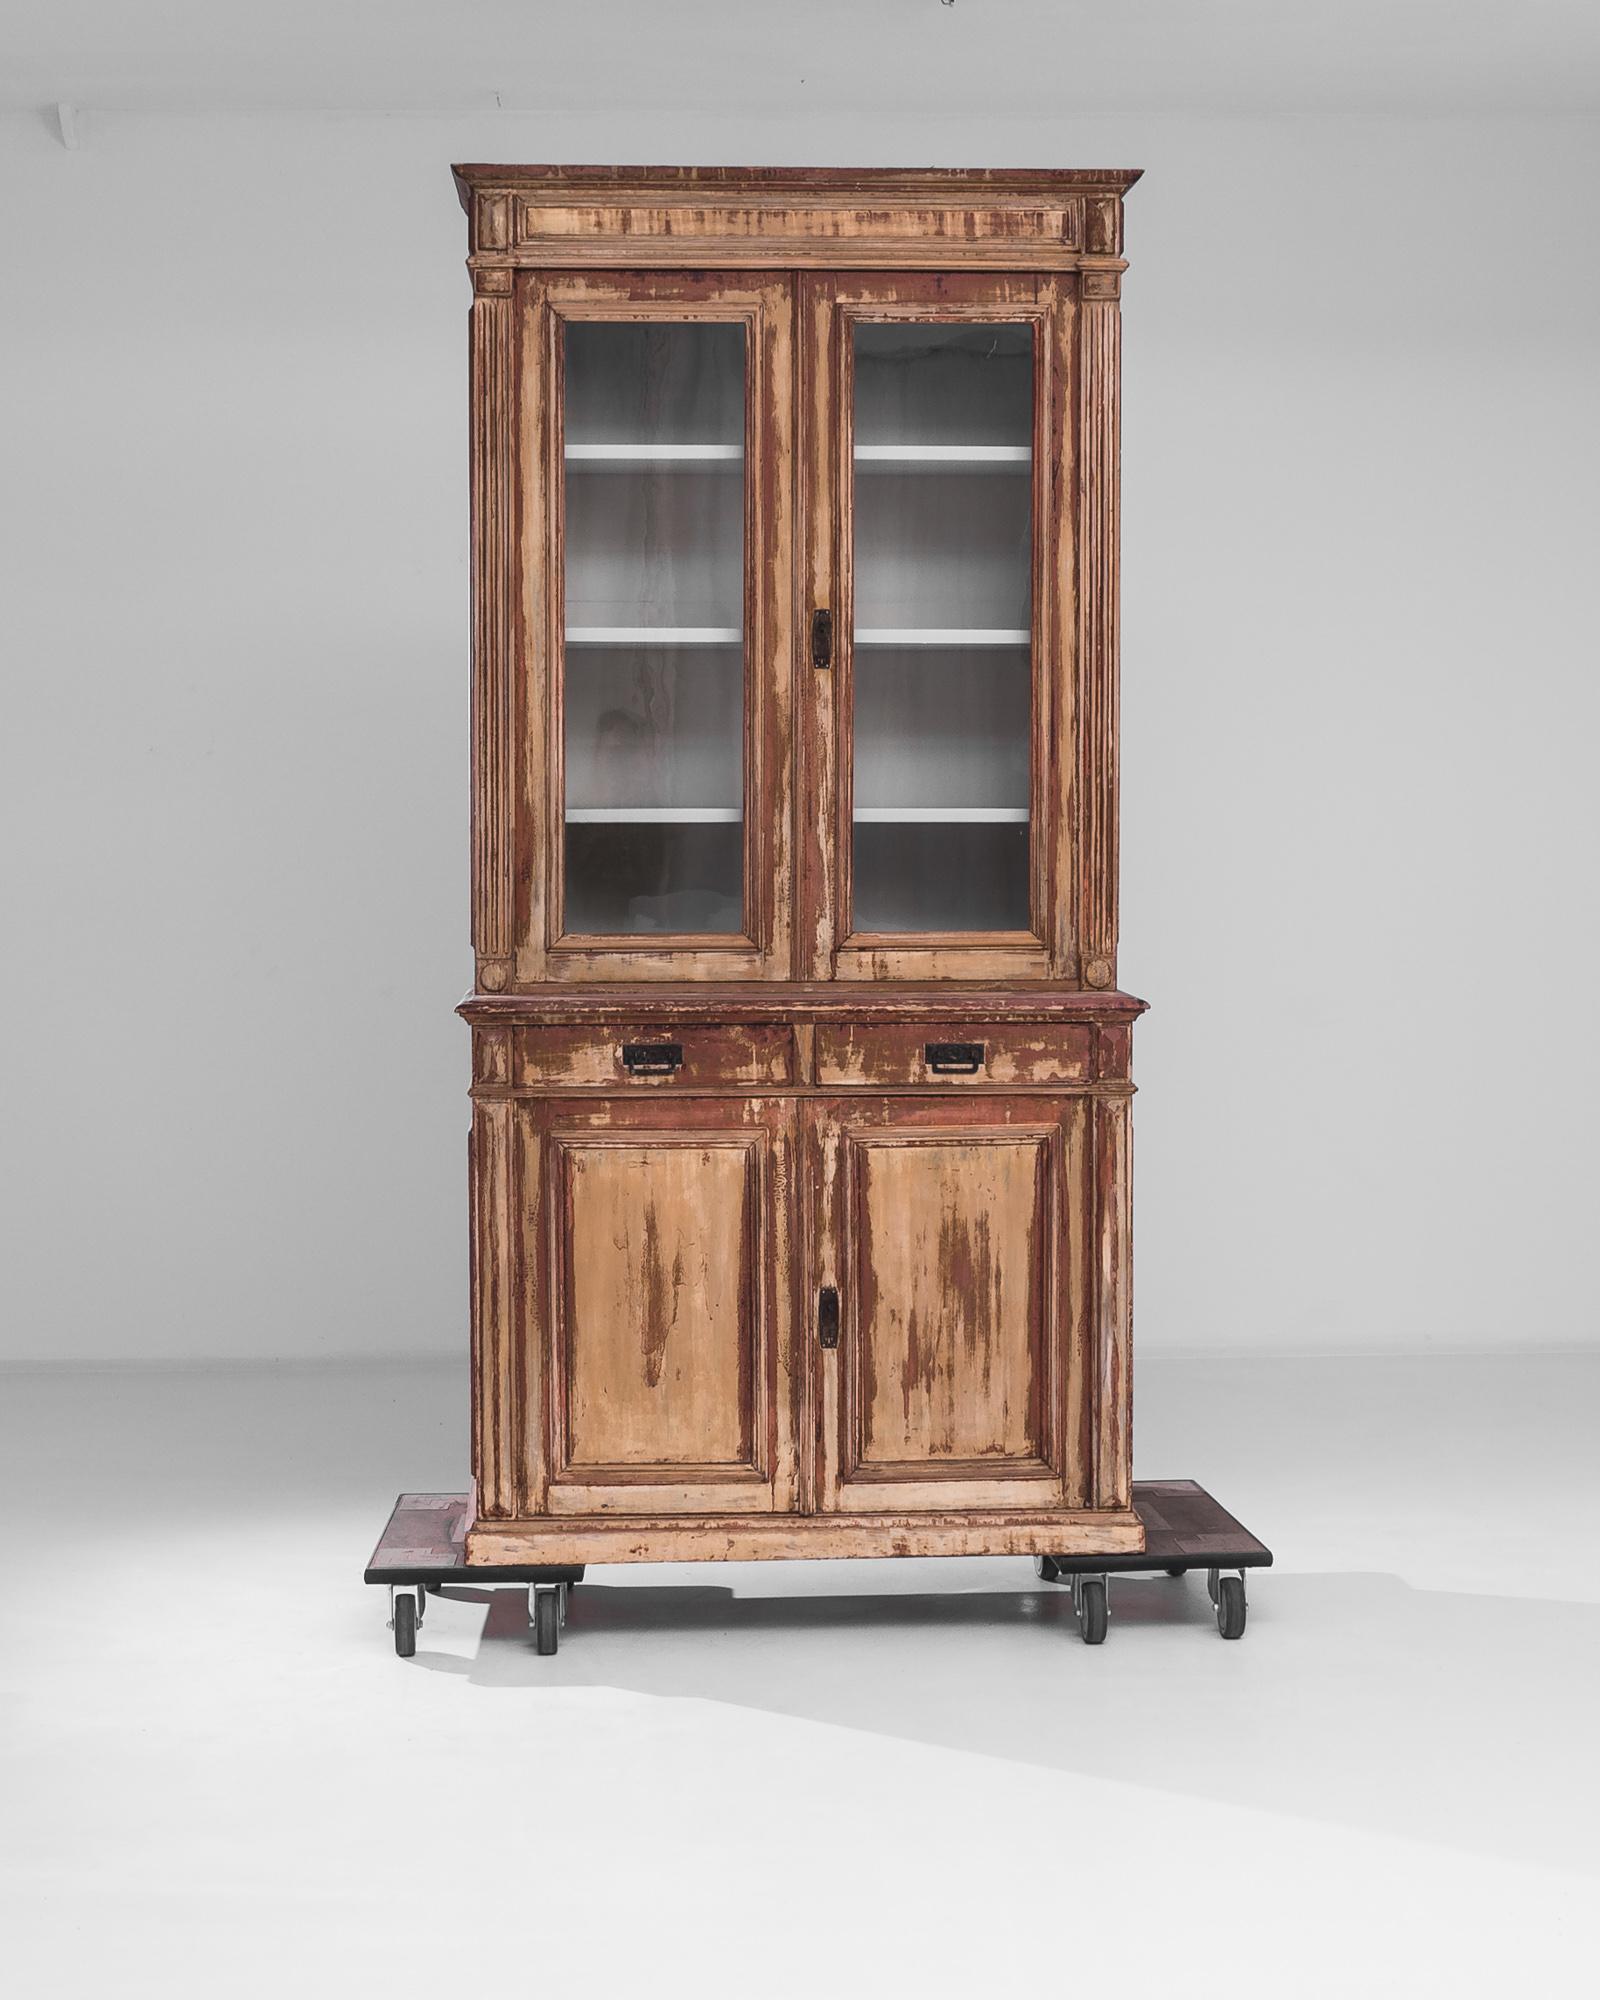 A wooden vitrine from France, produced circa 1900. Standing seven and a half feet tall, this majestic display case features a glass-fronted, double door cabinet with white interior above two central sliding drawers and a lower, double door cabinet